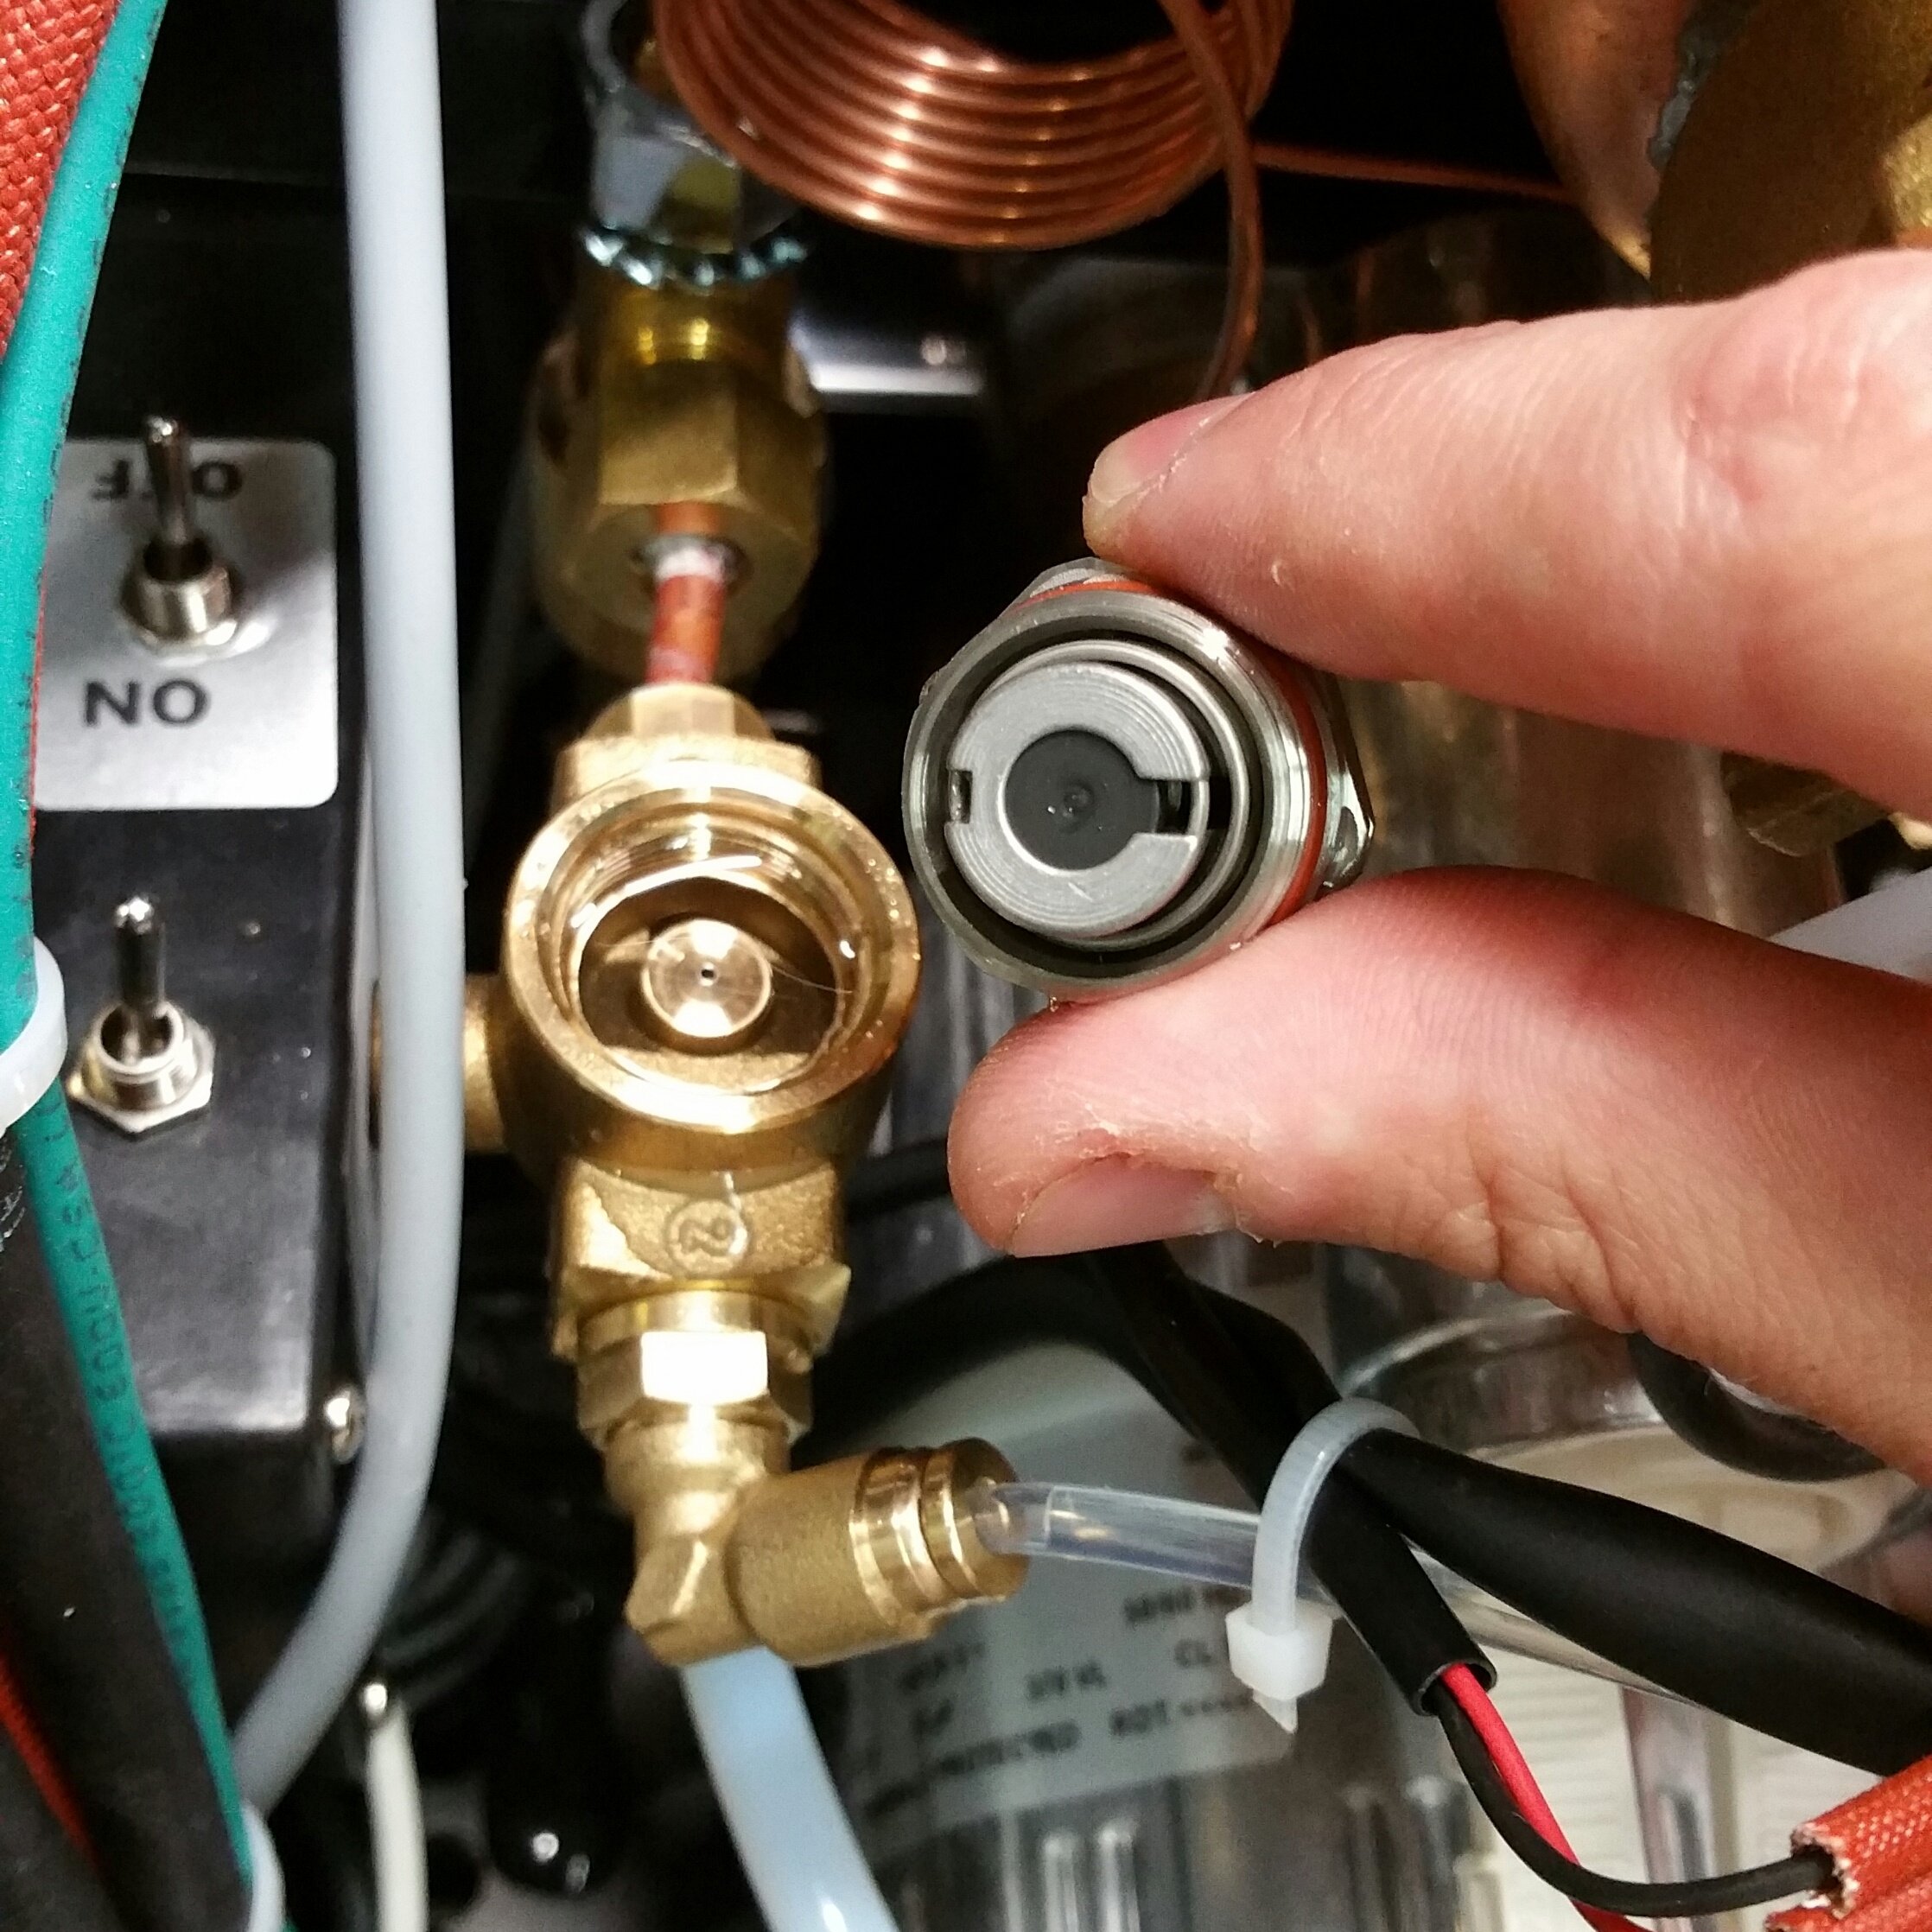 LUCCA A53 / Vivaldi: Cleaning Fill Solenoid